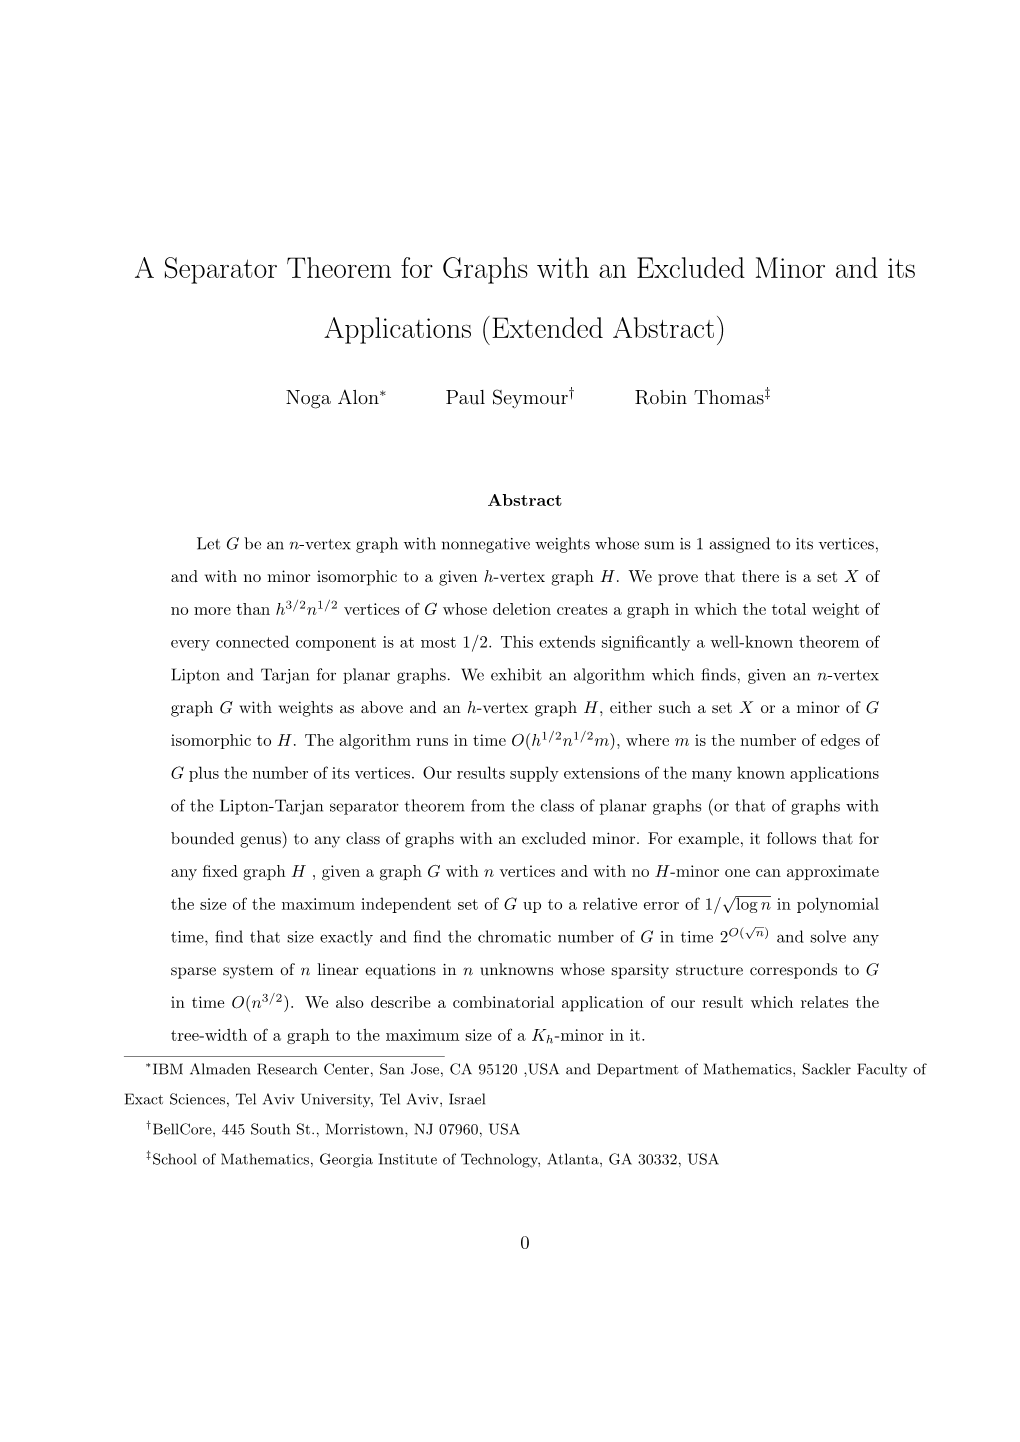 A Separator Theorem for Graphs with an Excluded Minor and Its